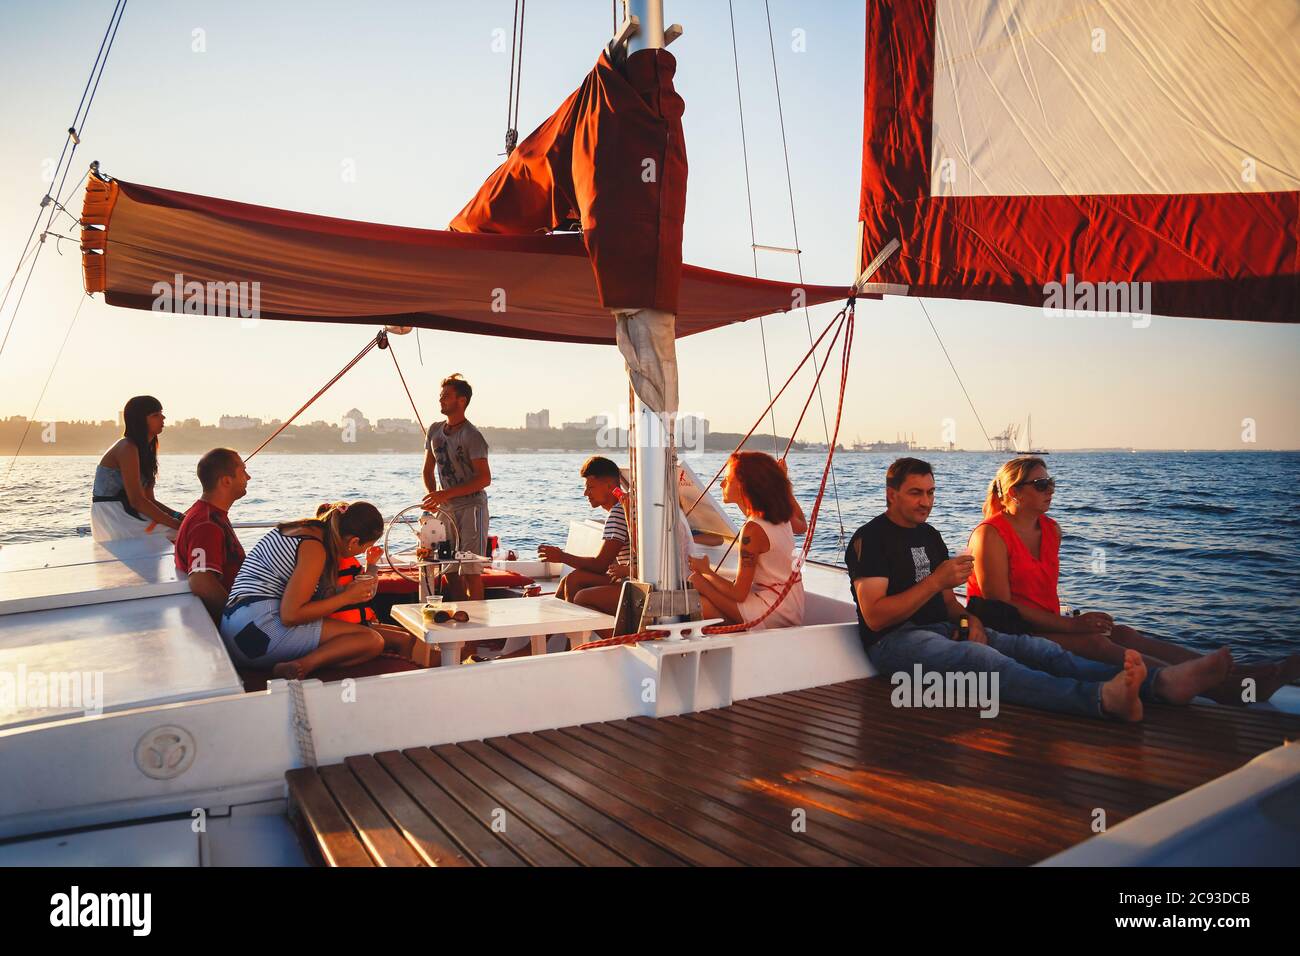 ODESSA, UKRAINE - SEPTEMBER 10, 2016: Different people at the yacht excursion in sea, summer sunset Stock Photo